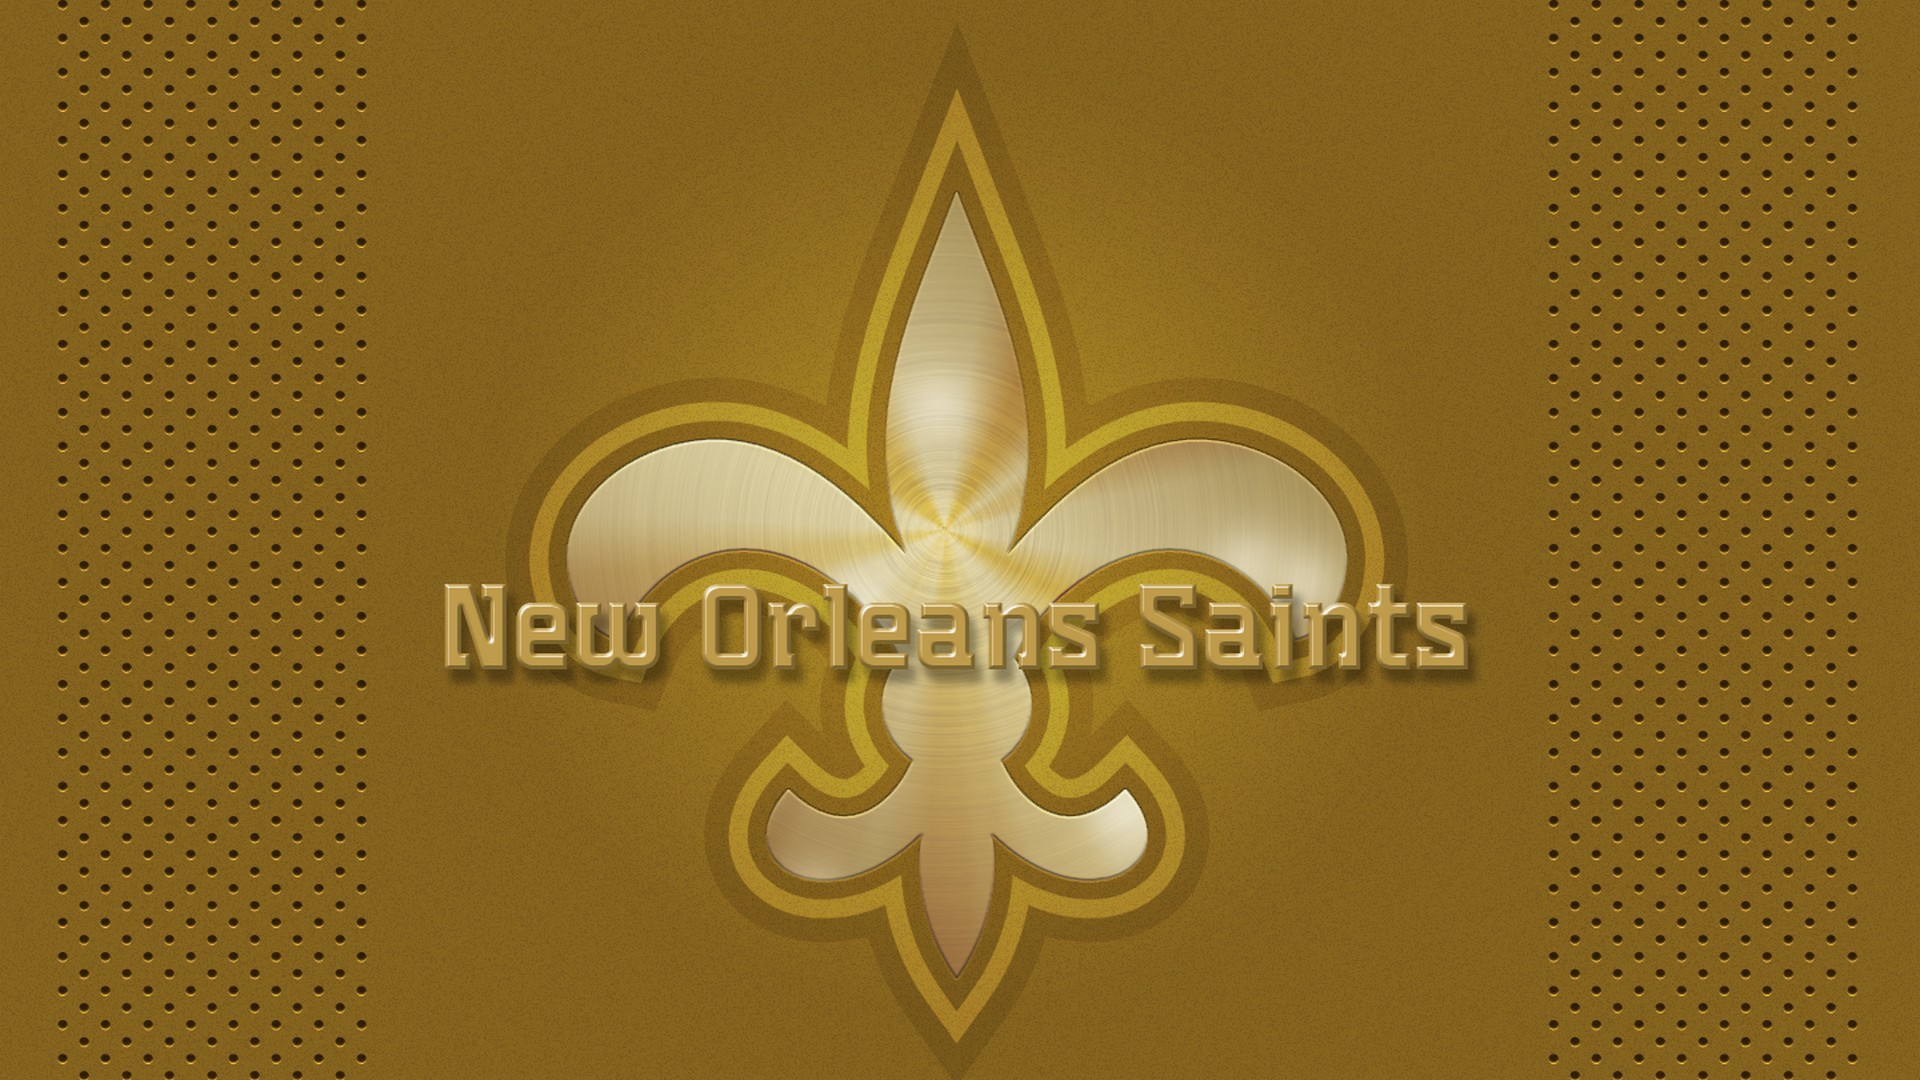 1920x1080 New Orleans Saints Wallpaper For Mac Backgrounds with resolution   pixel. You can make this